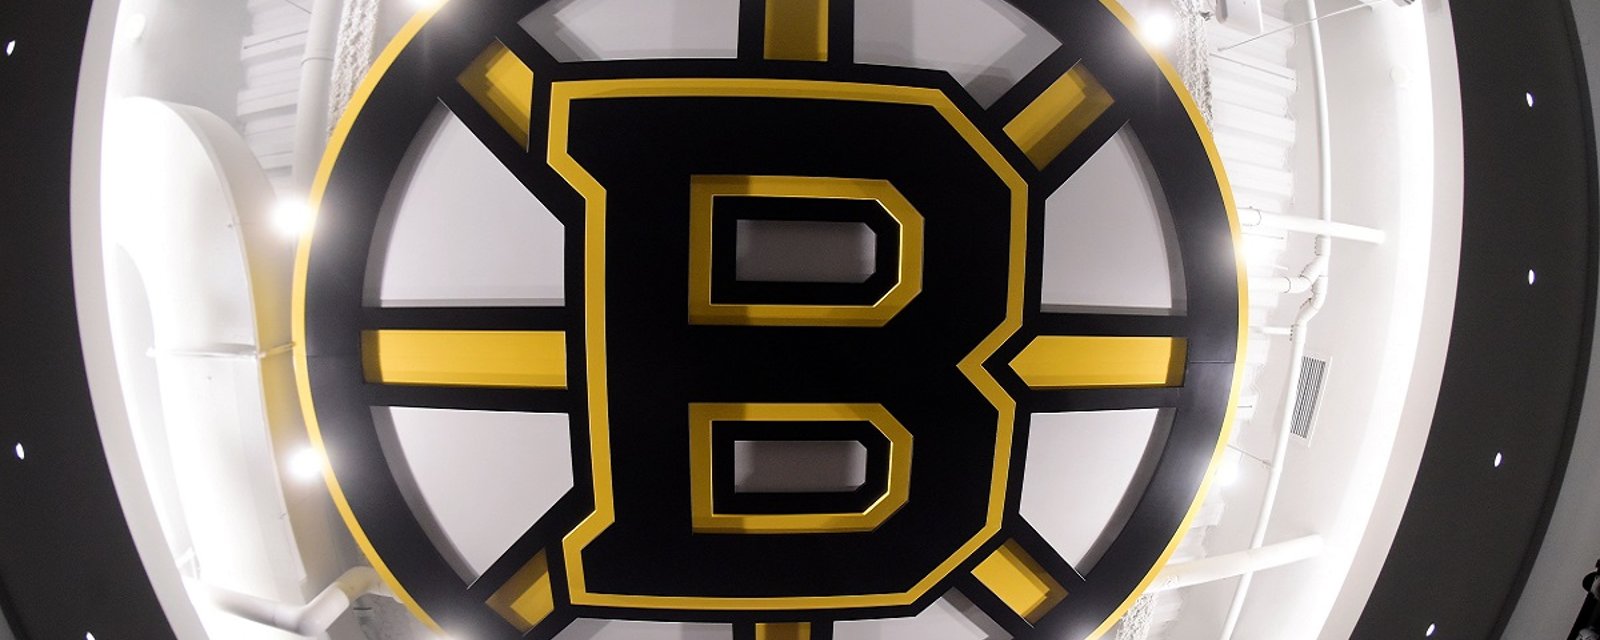 Bruins insider predicts 2 free agents signings.